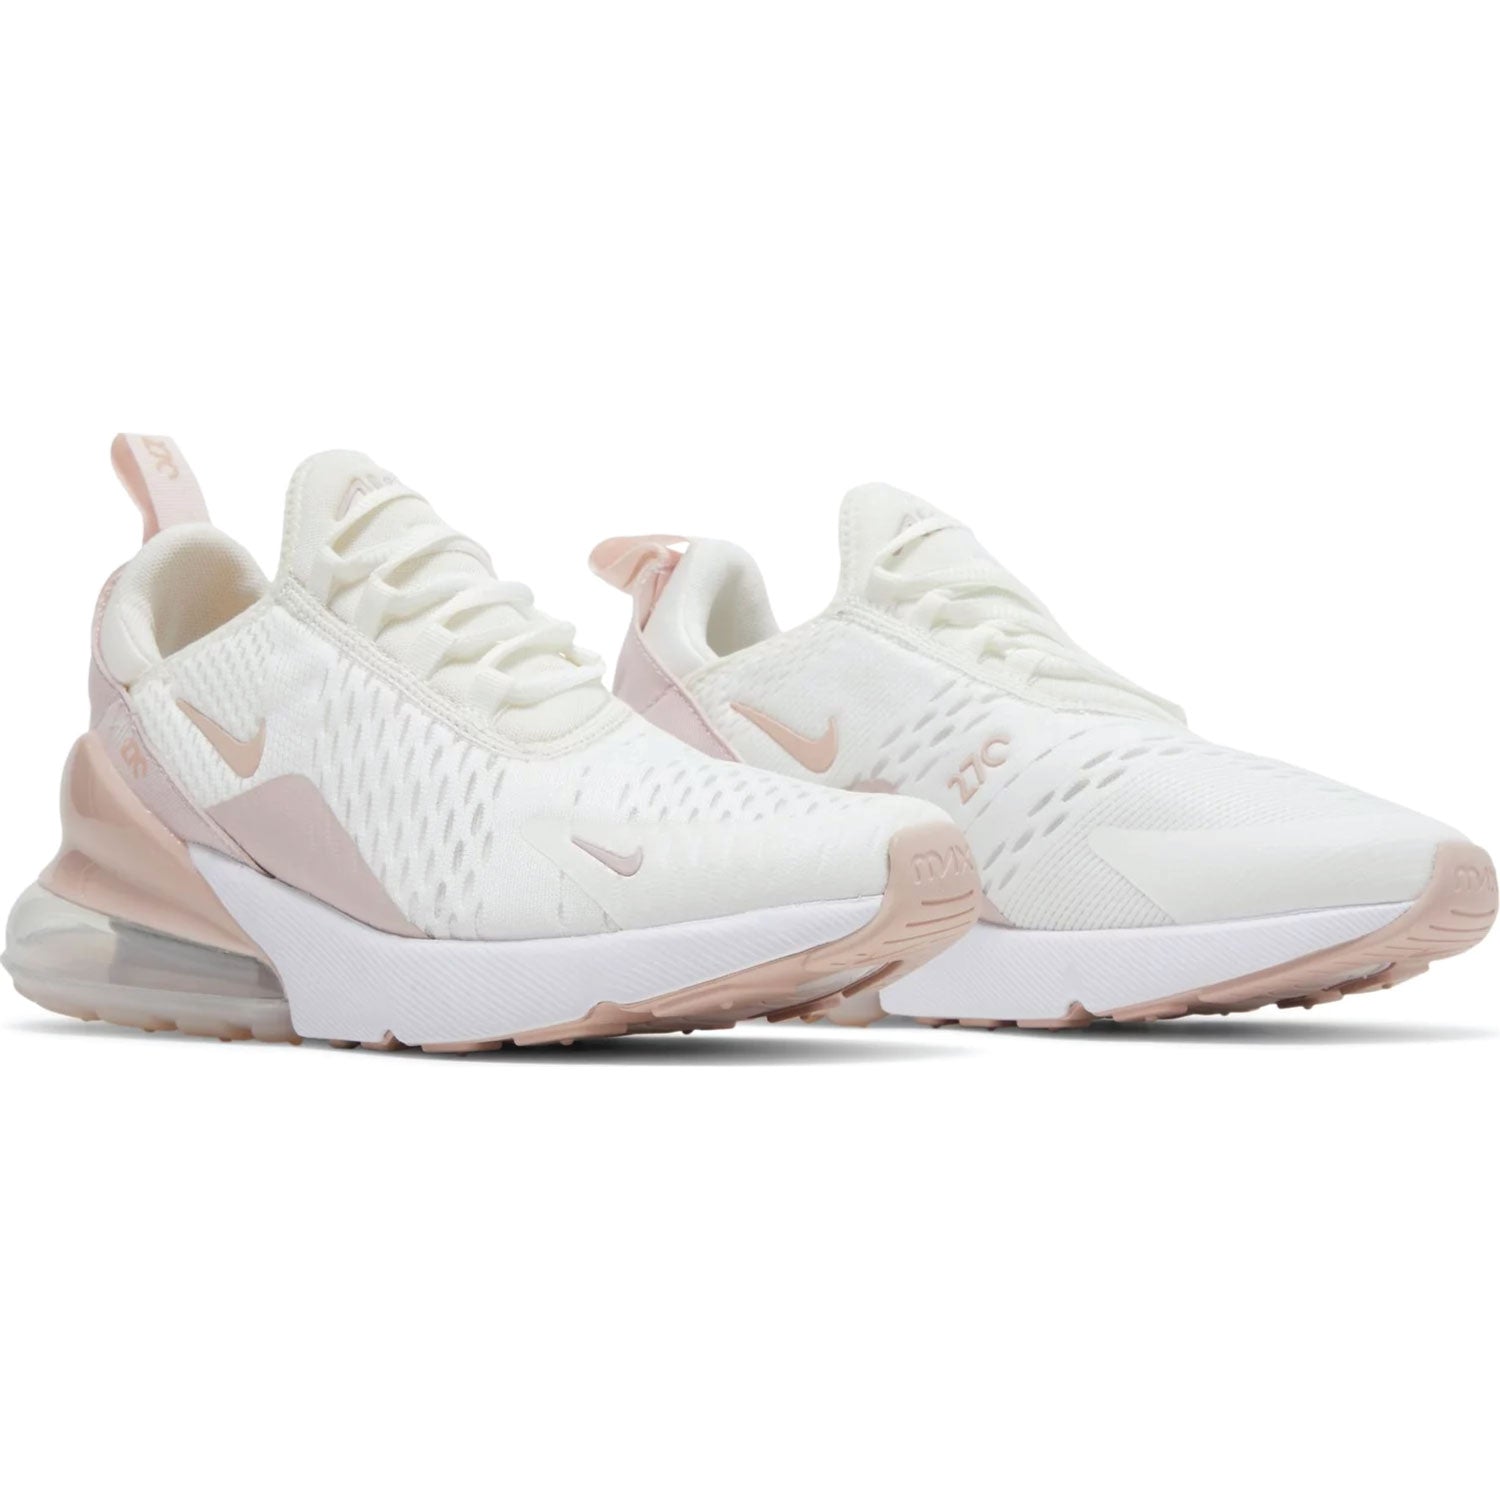 Wmns Air Max 270 Essential 'Oxford Pink' Trainers Nike   